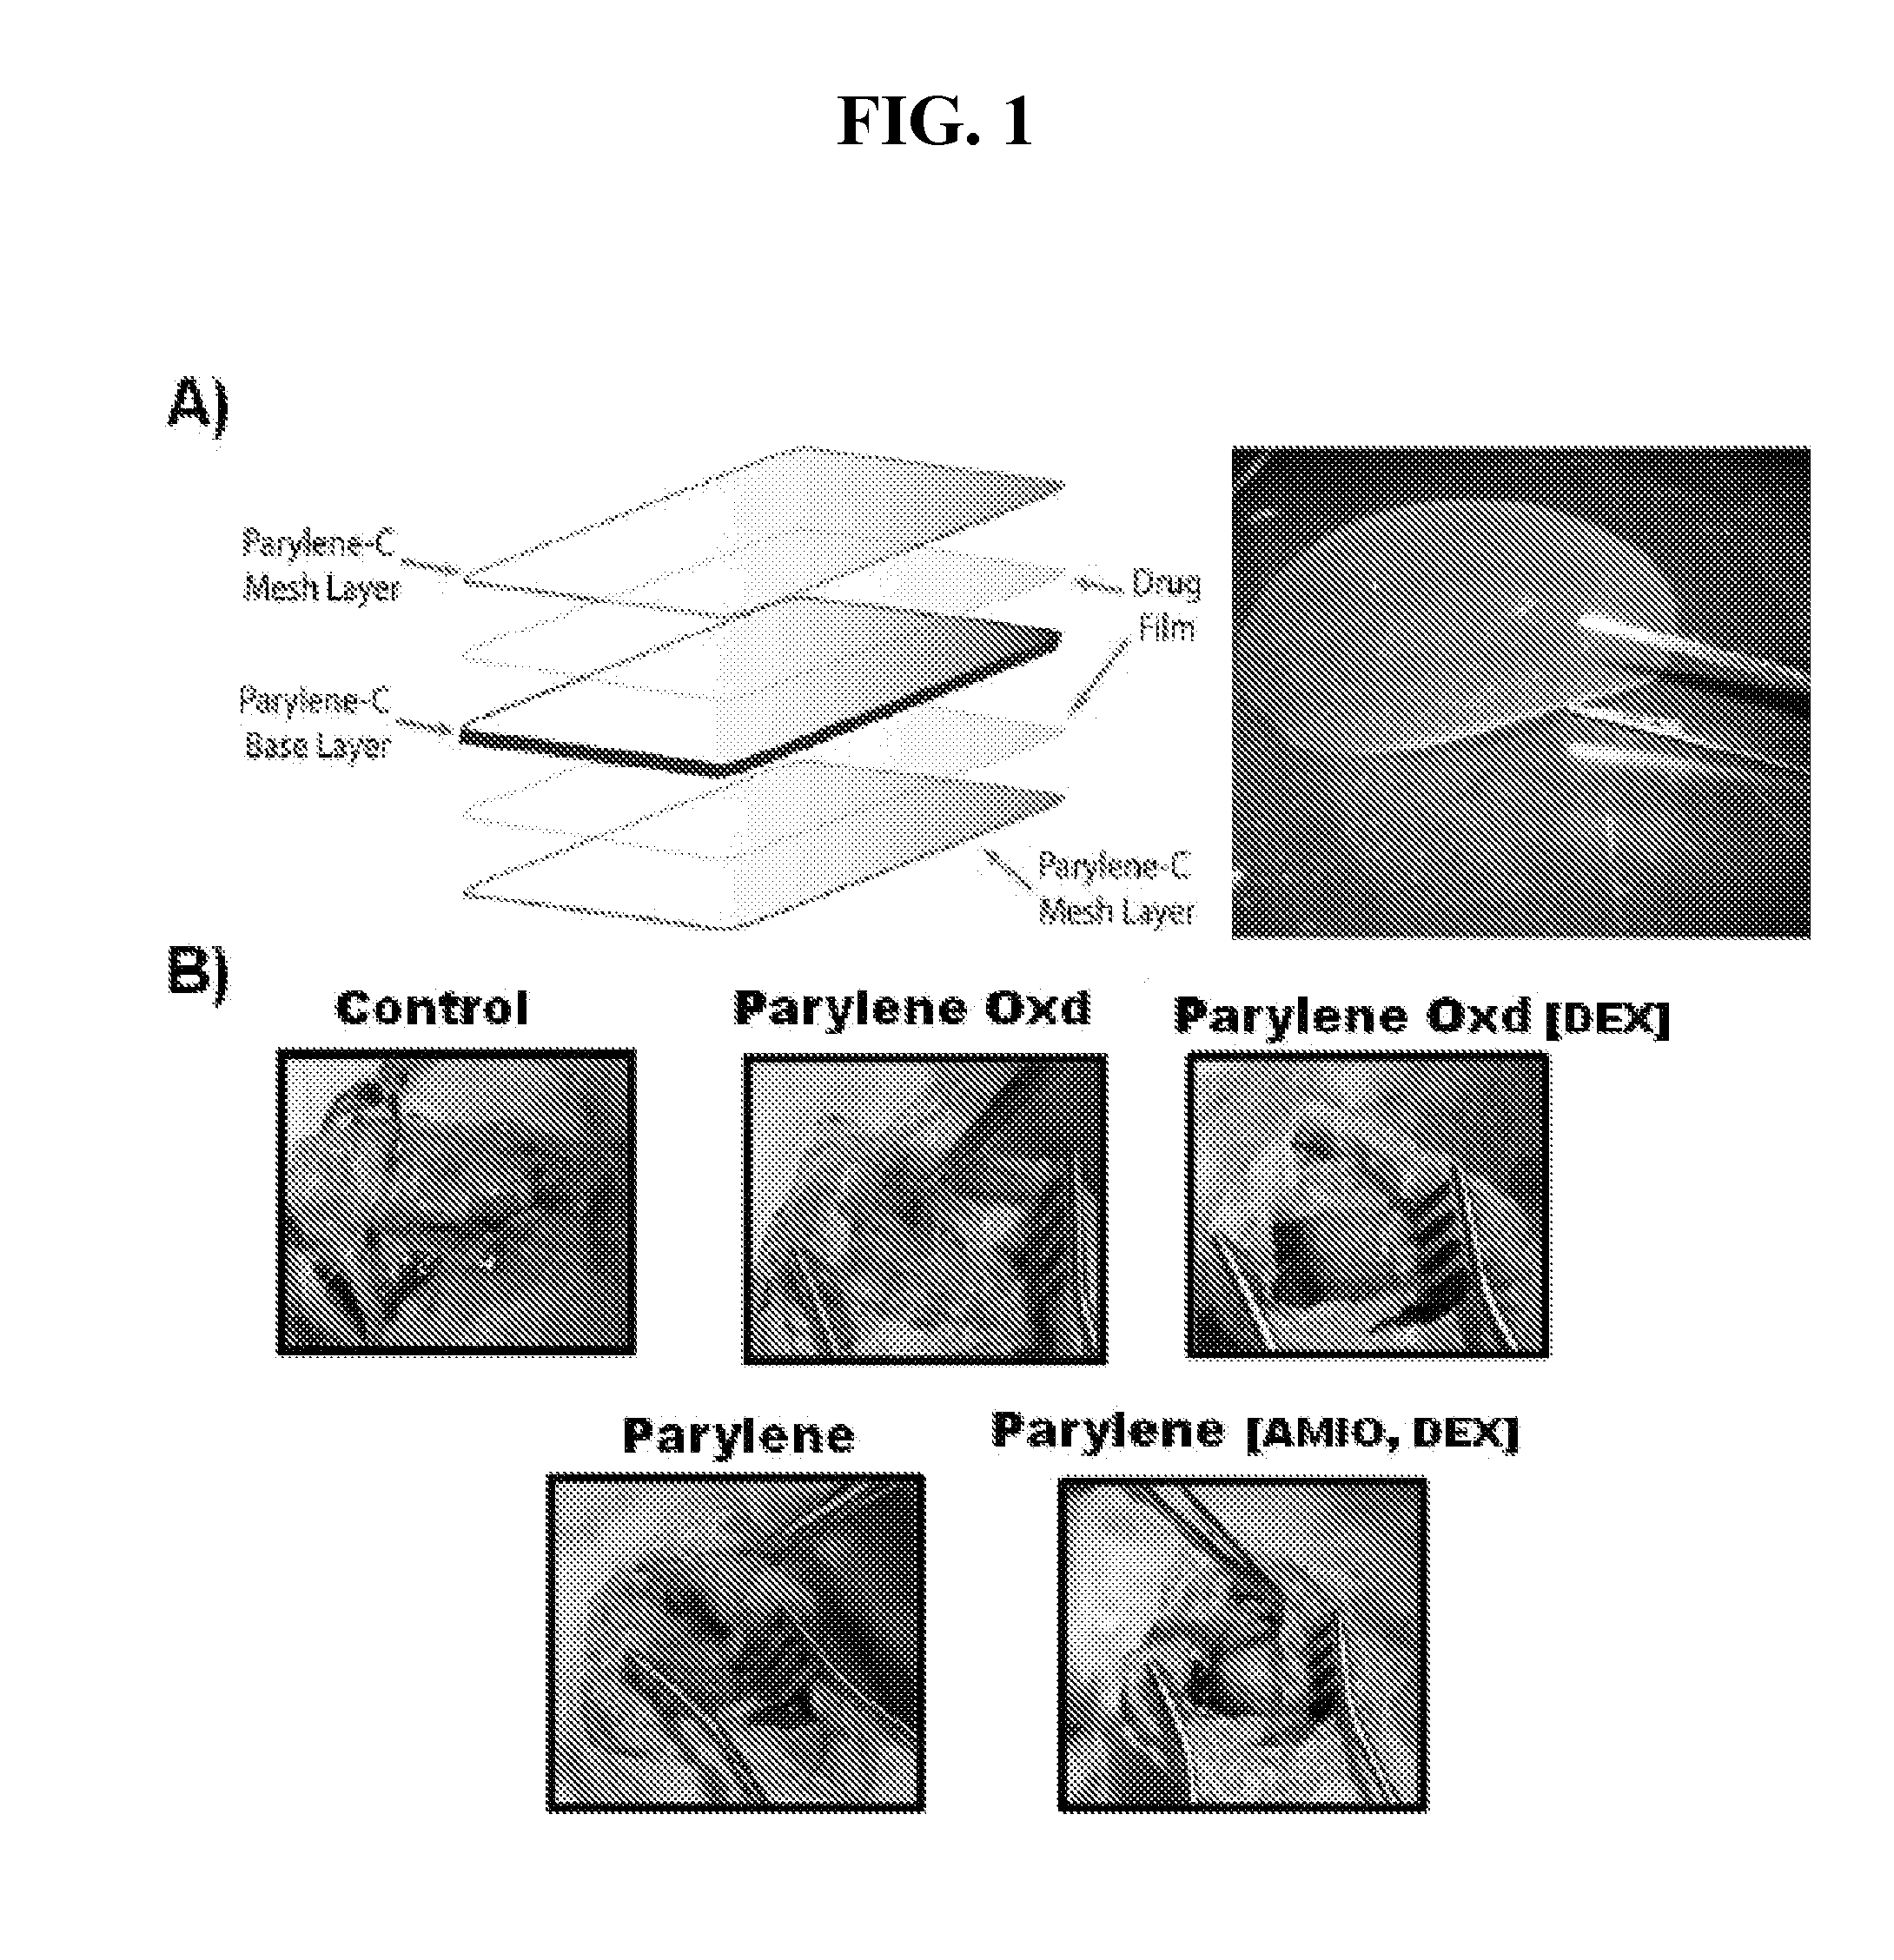 Para-xylene films and therapeutic uses thereof